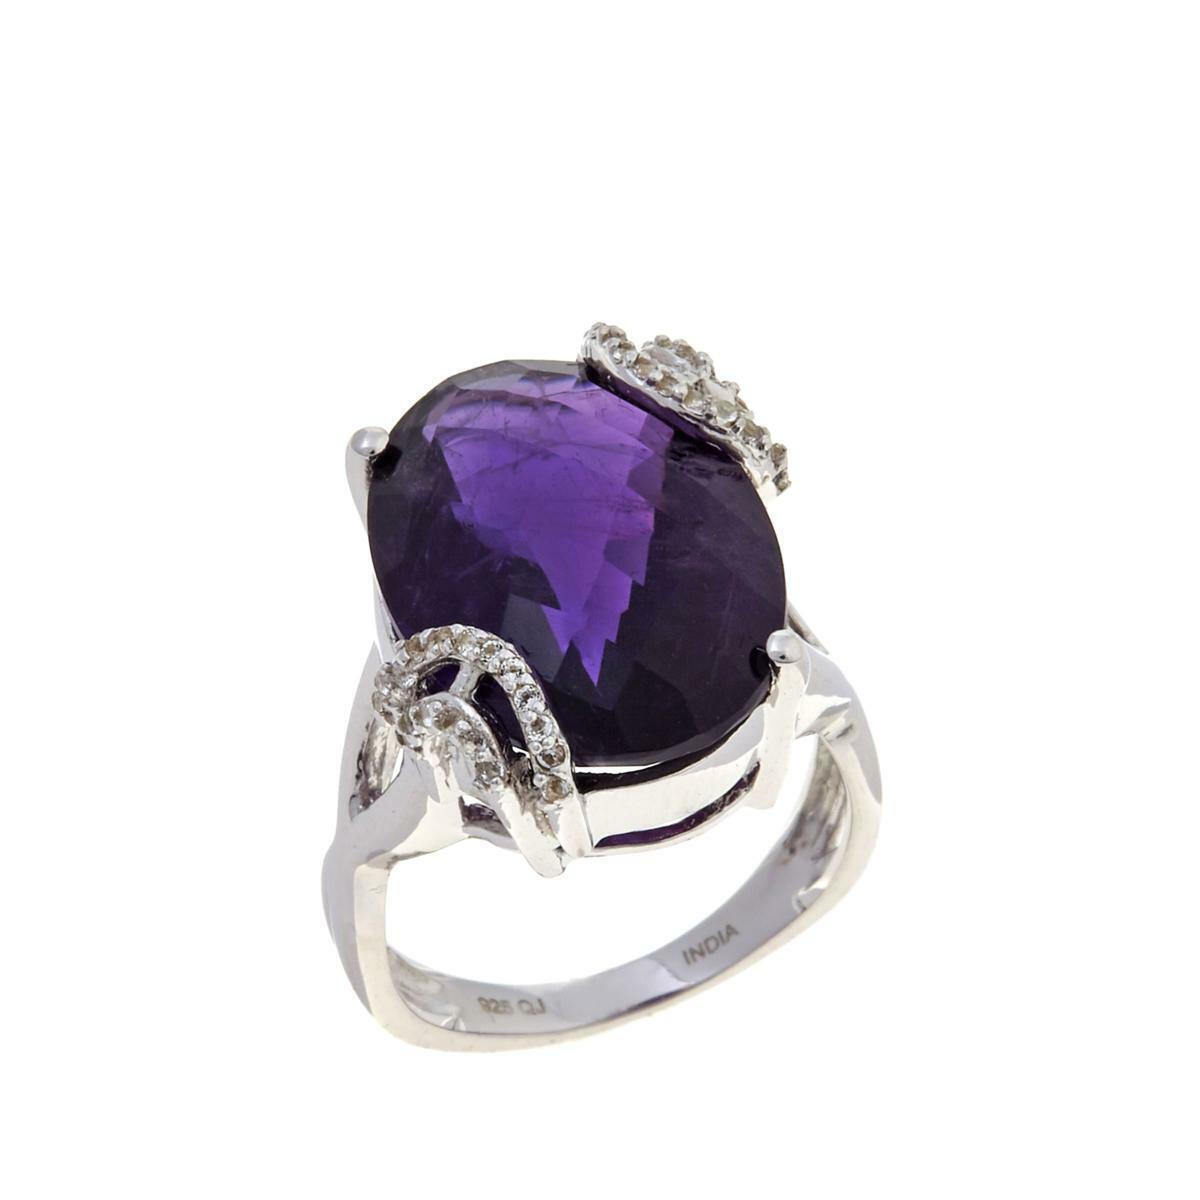 Colleen Lopez Amethyst Solitaire & White Topaz Sterling Silver Ring, Size 8